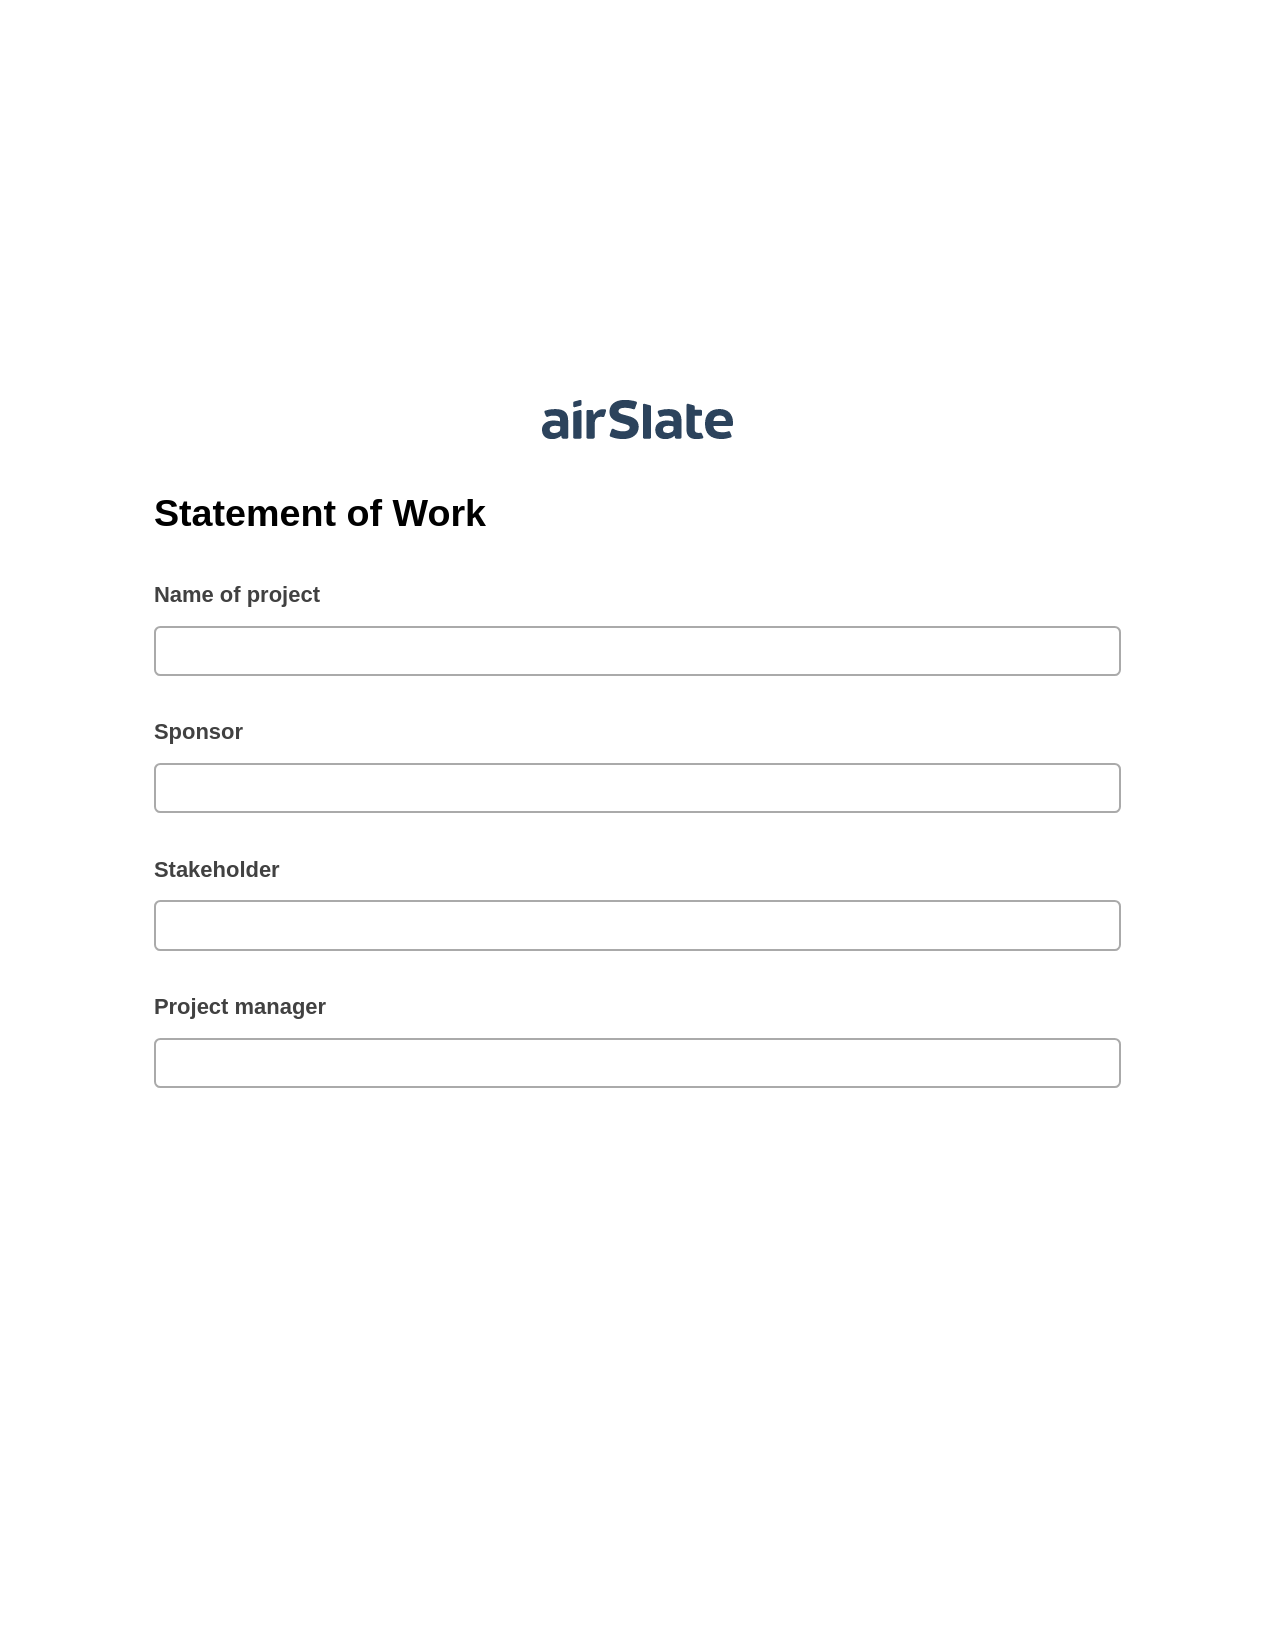 Statement of Work Pre-fill from Google Sheet Dropdown Options Bot, Remove Tags From Slate Bot, Post-finish Document Bot